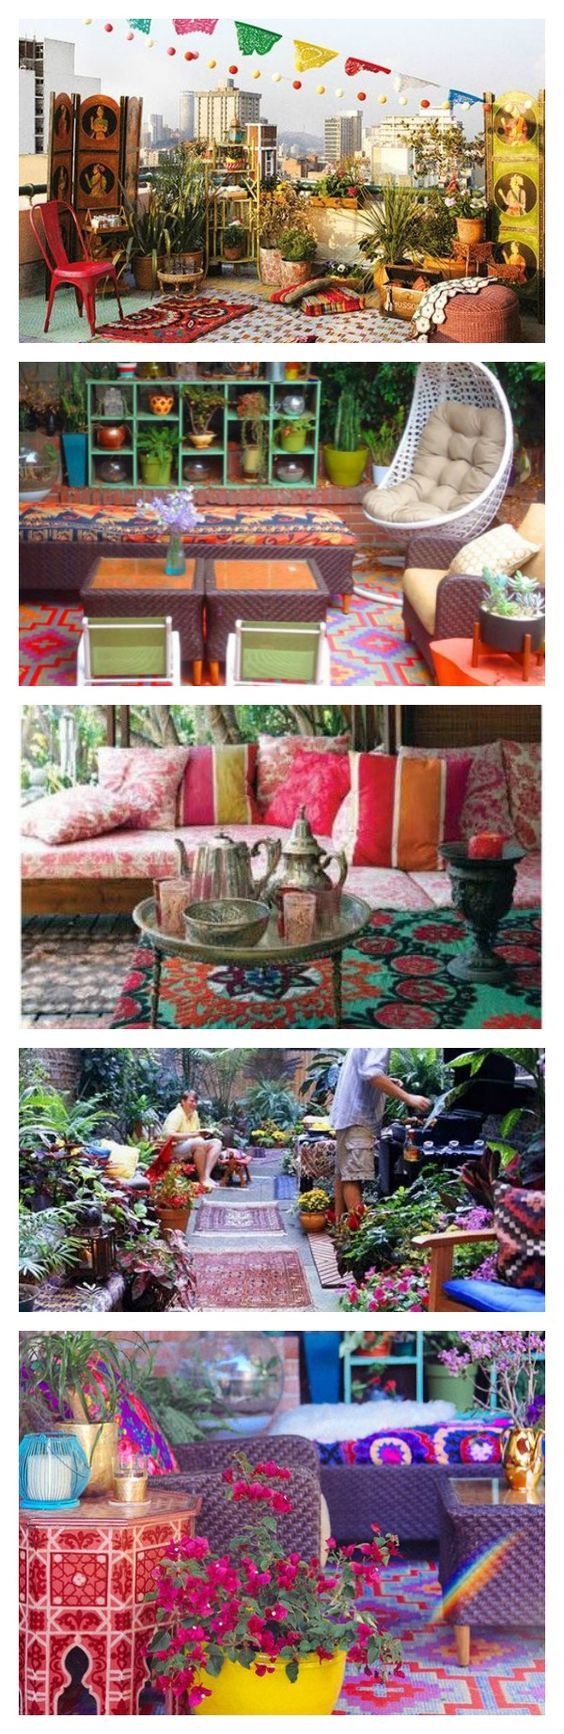 Colorful Bohemian Outdoor Spaces & How to Get the Look {bohemian backyards, porches and patios}